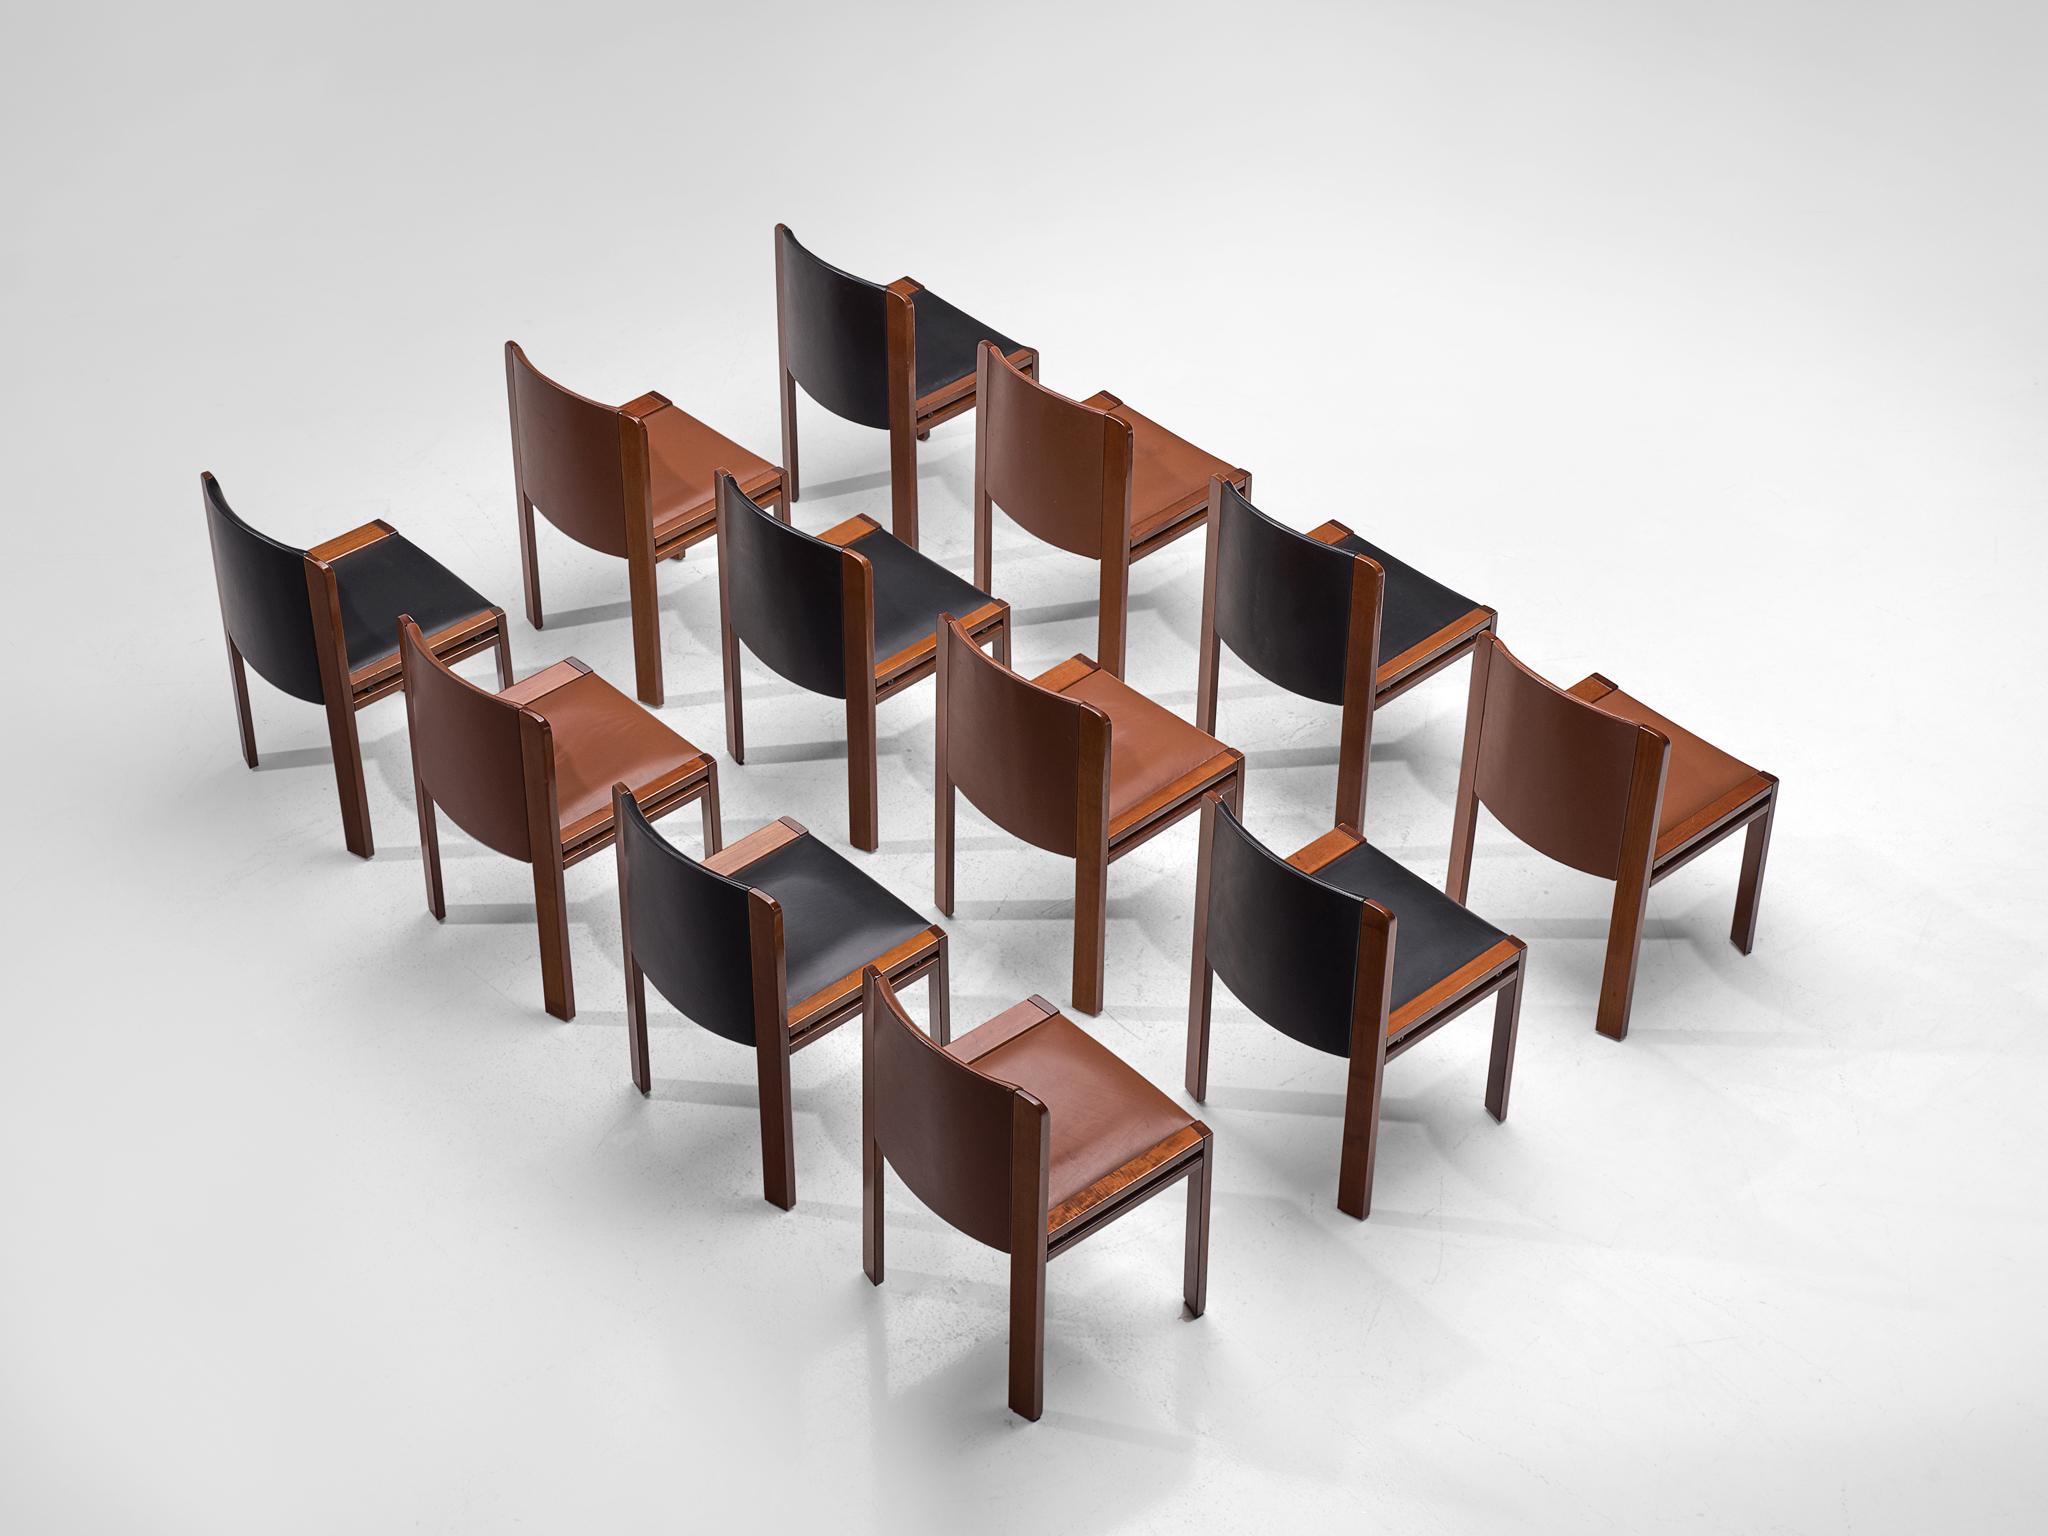 Joe Colombo for Pozzi, 12 dining chairs model '300', leather and oak, Italy, 1966.

This functionalist set of dining chairs is designed by Joe Colombo in 1966. His fascination with functionality meant he always focused on the user, which lead him